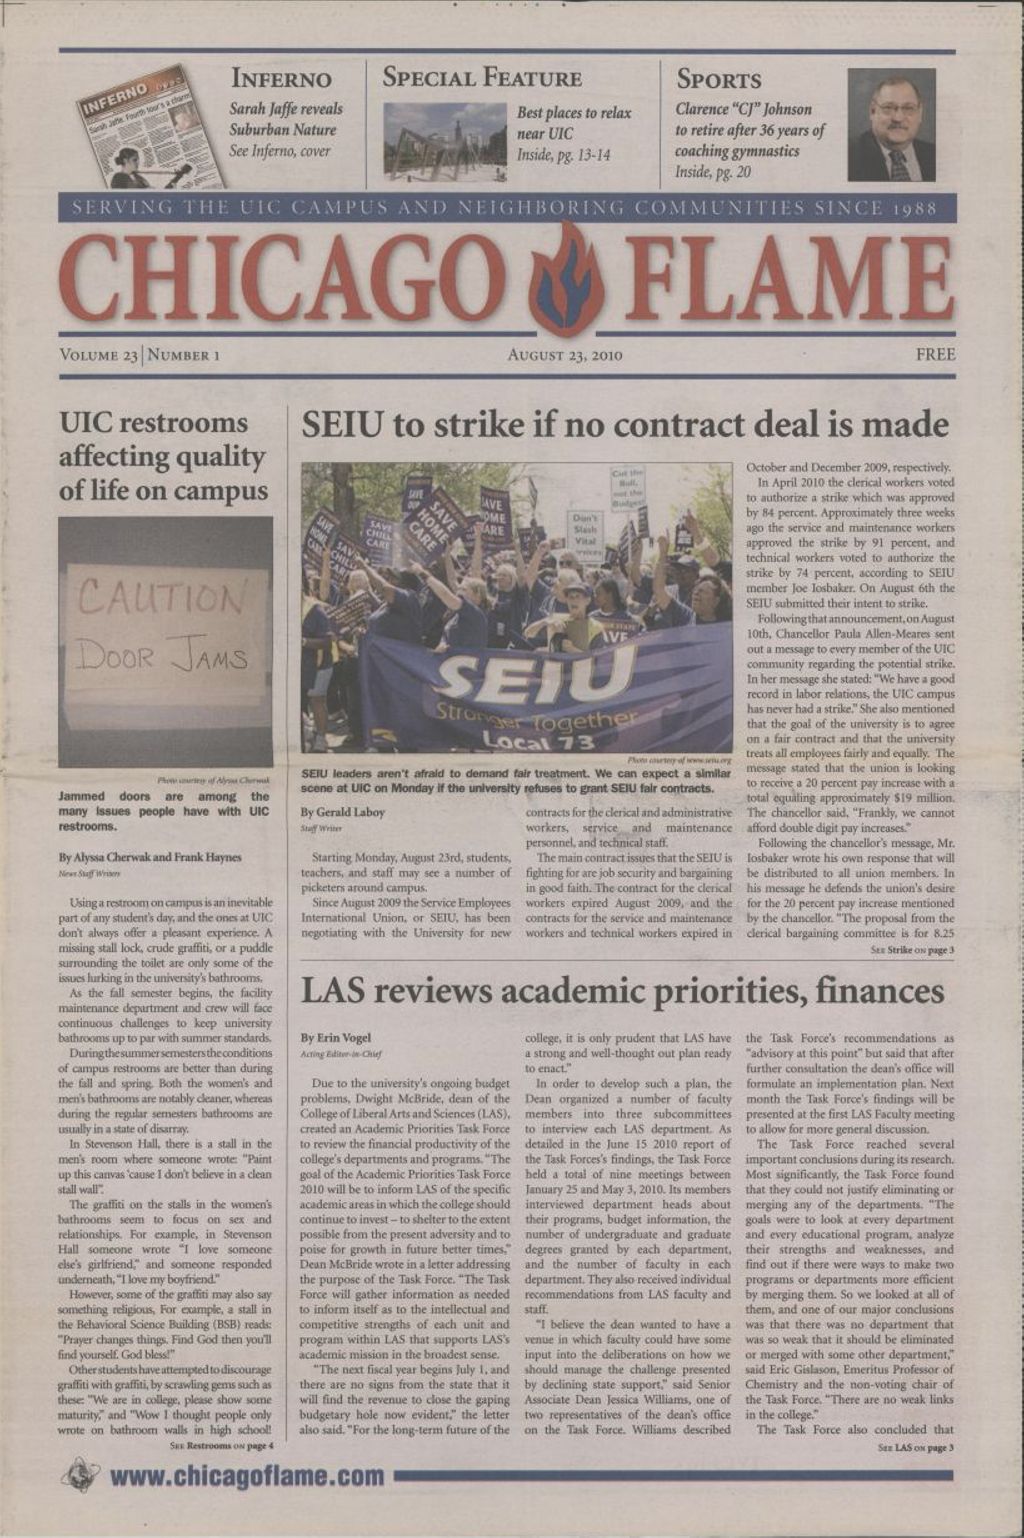 Miniature of Chicago Flame (August 23, 2010)